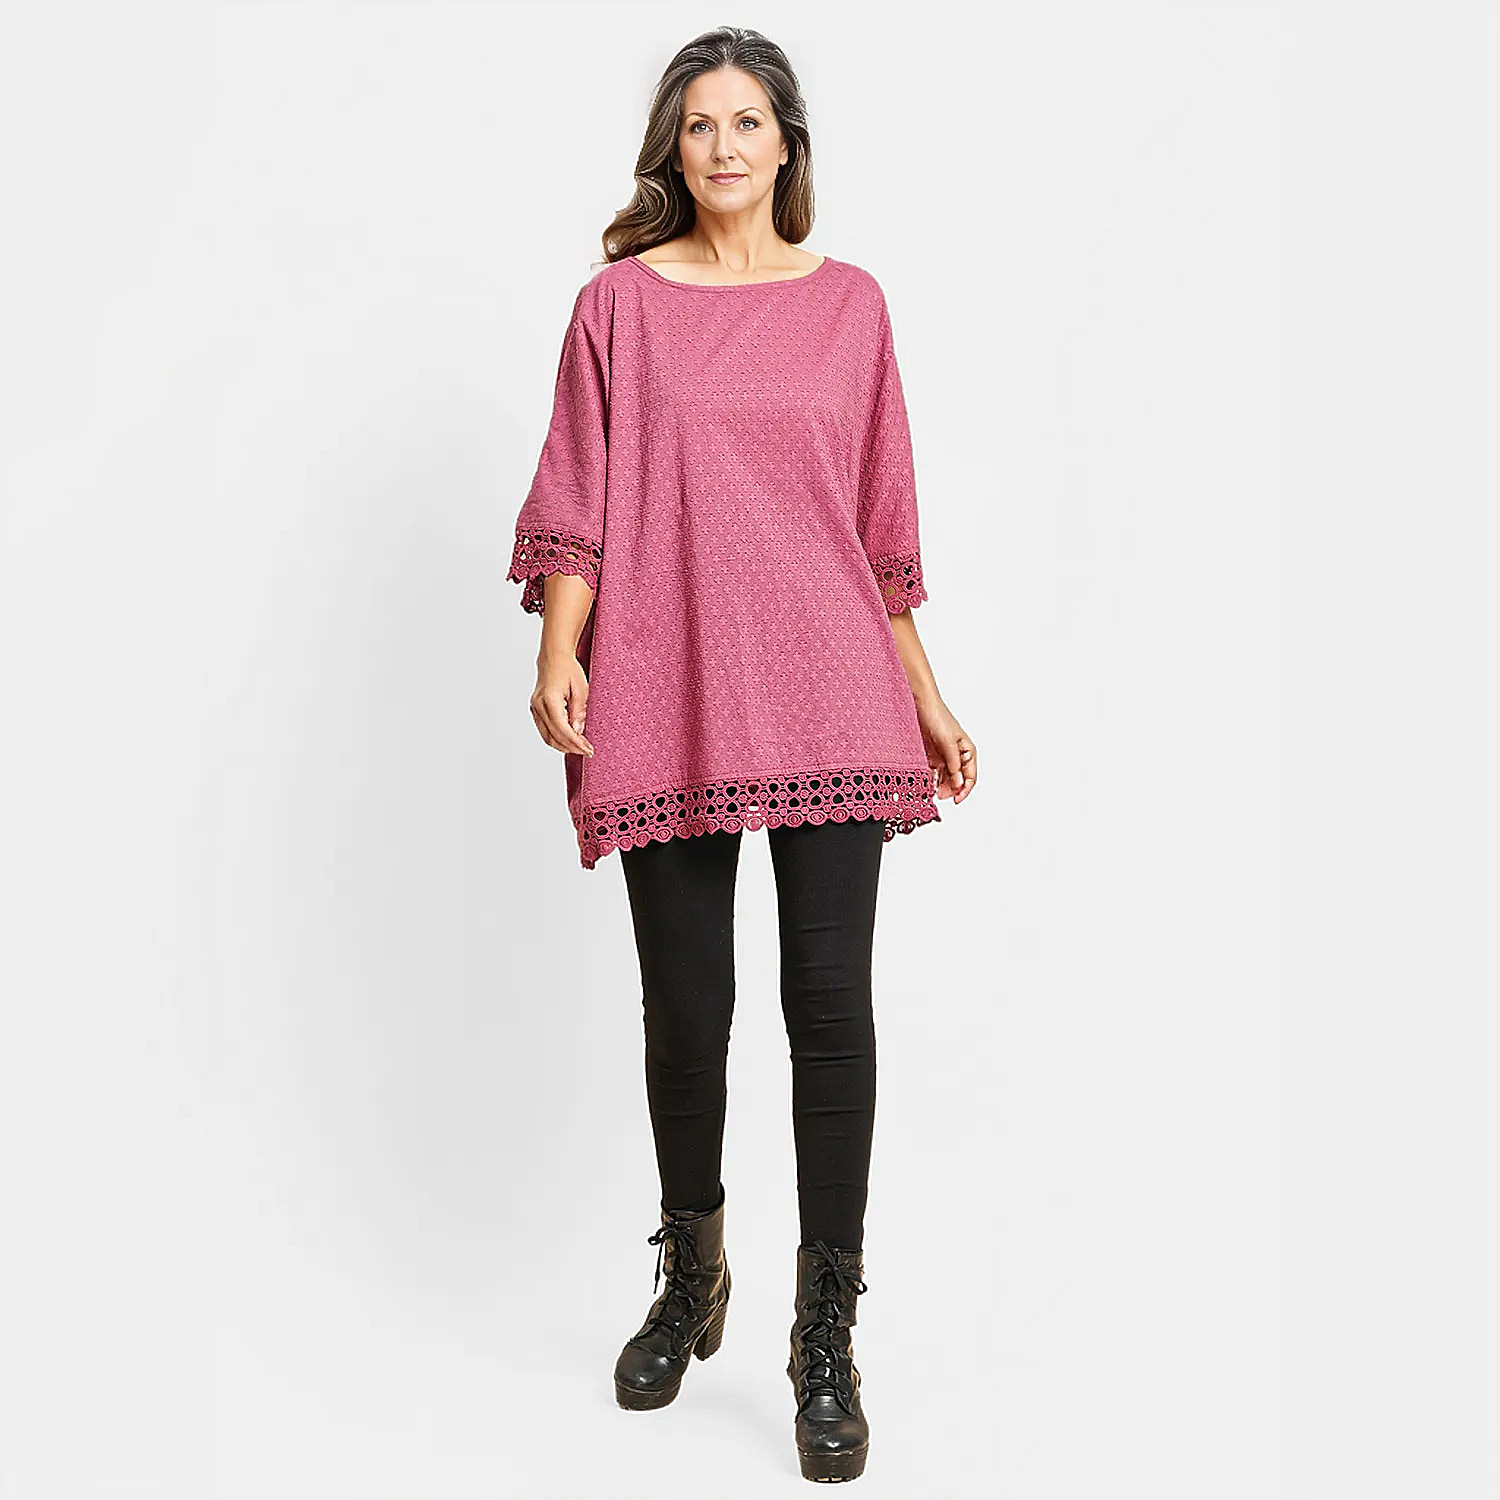 TAMSY-Lace-Detailing-100-Cotton-Womens-Top-Pink